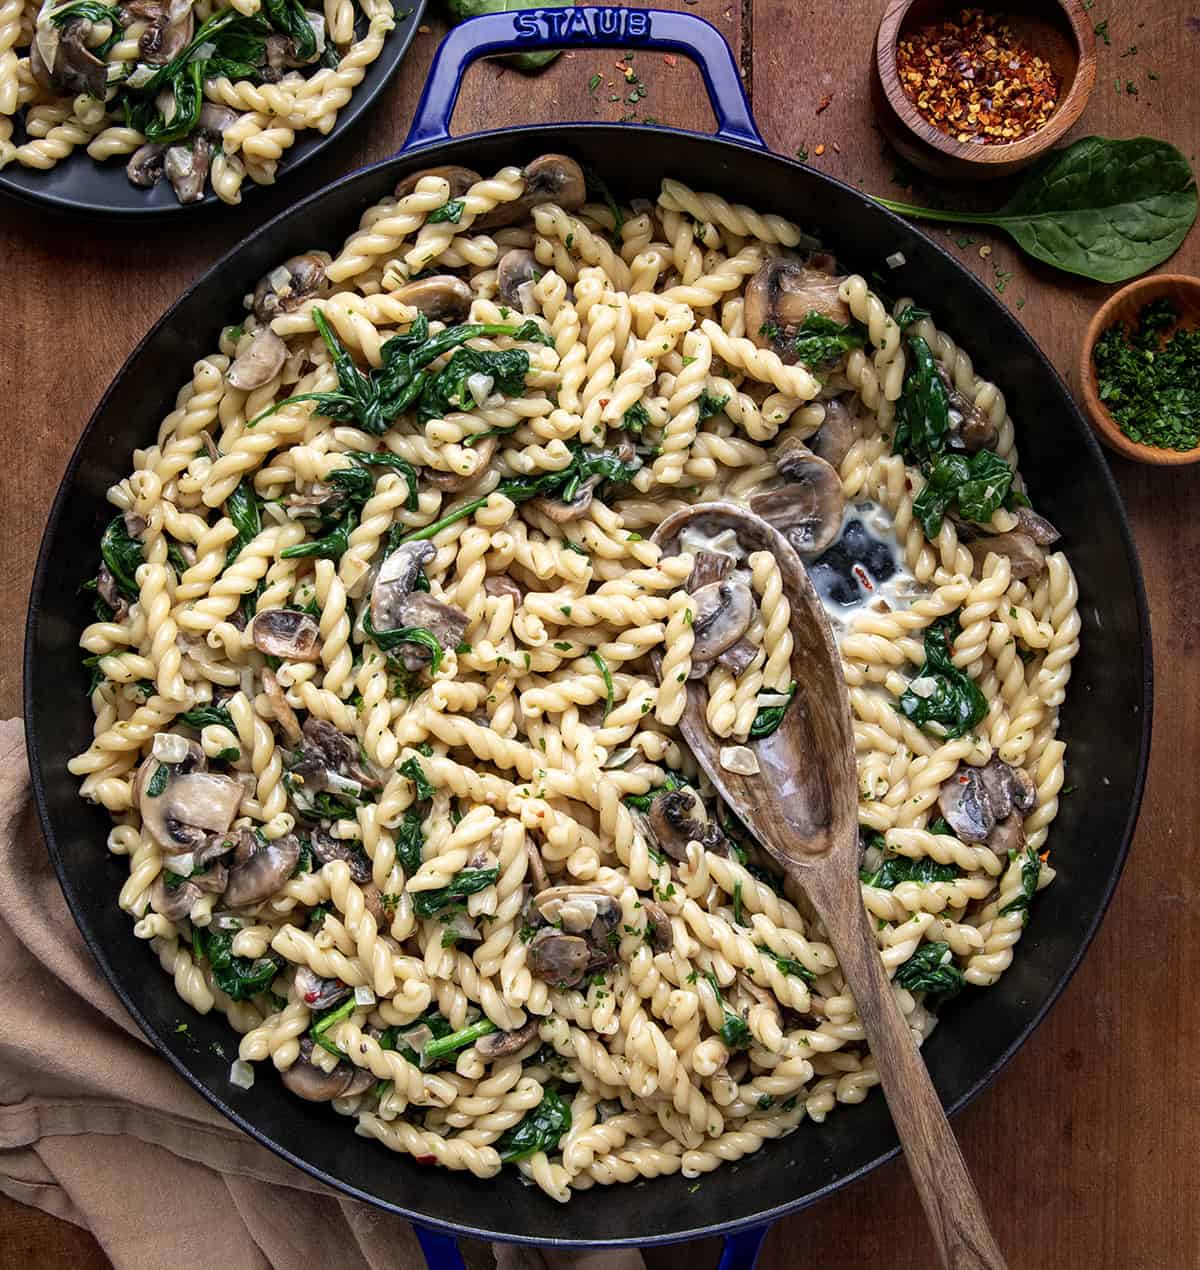 Skillet of Creamy Mushroom and Spinach Pasta with a wooden spoon in it from overhead.